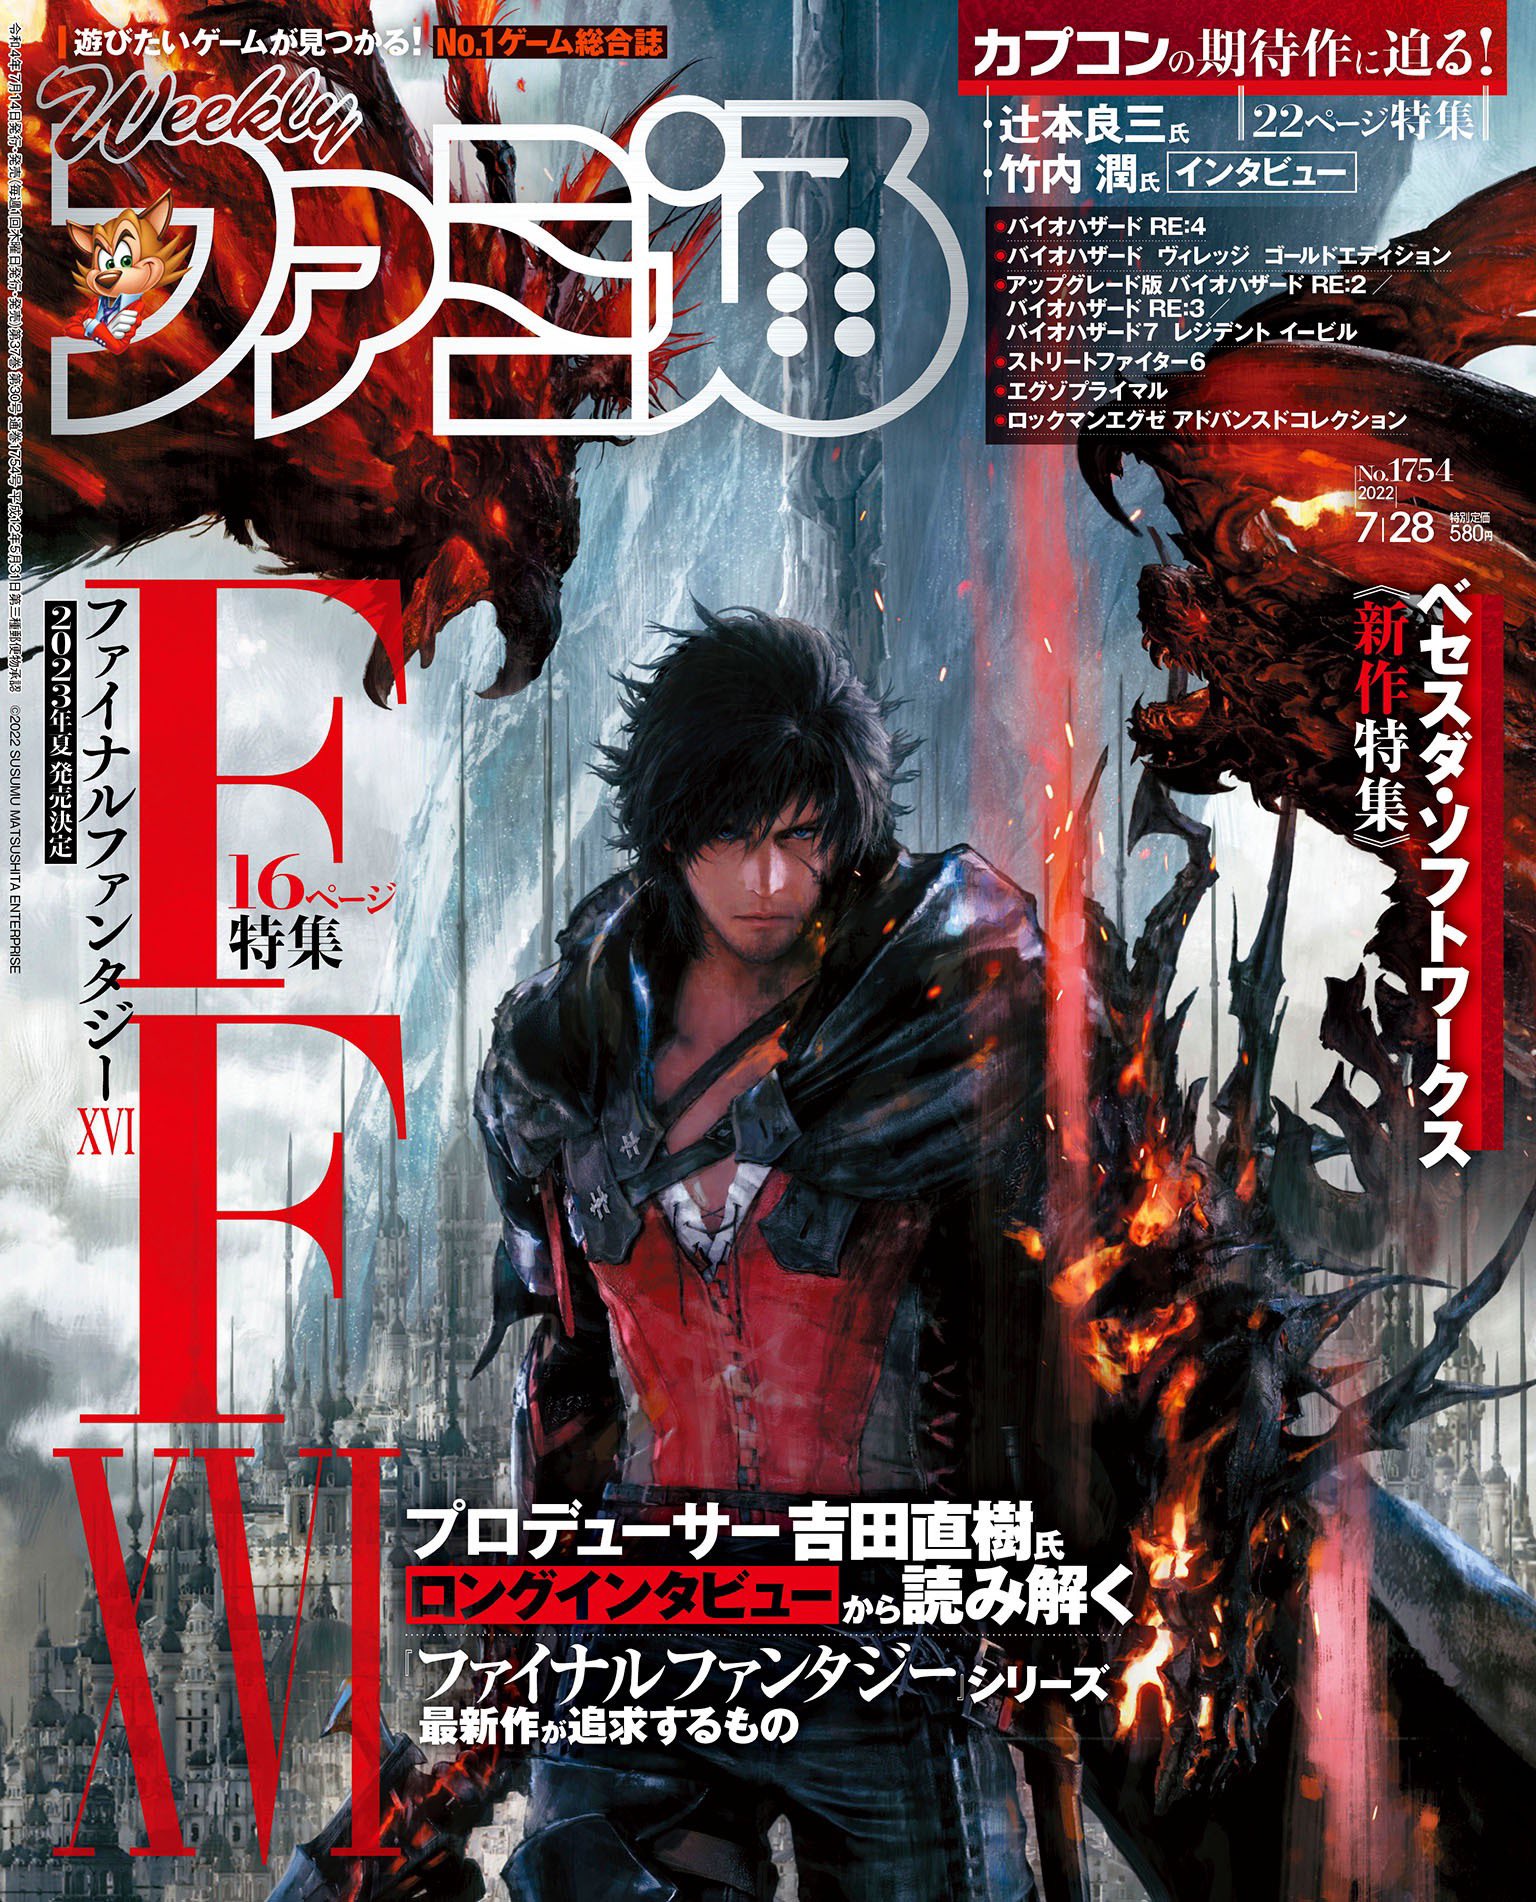 Famitsu cover for July 28